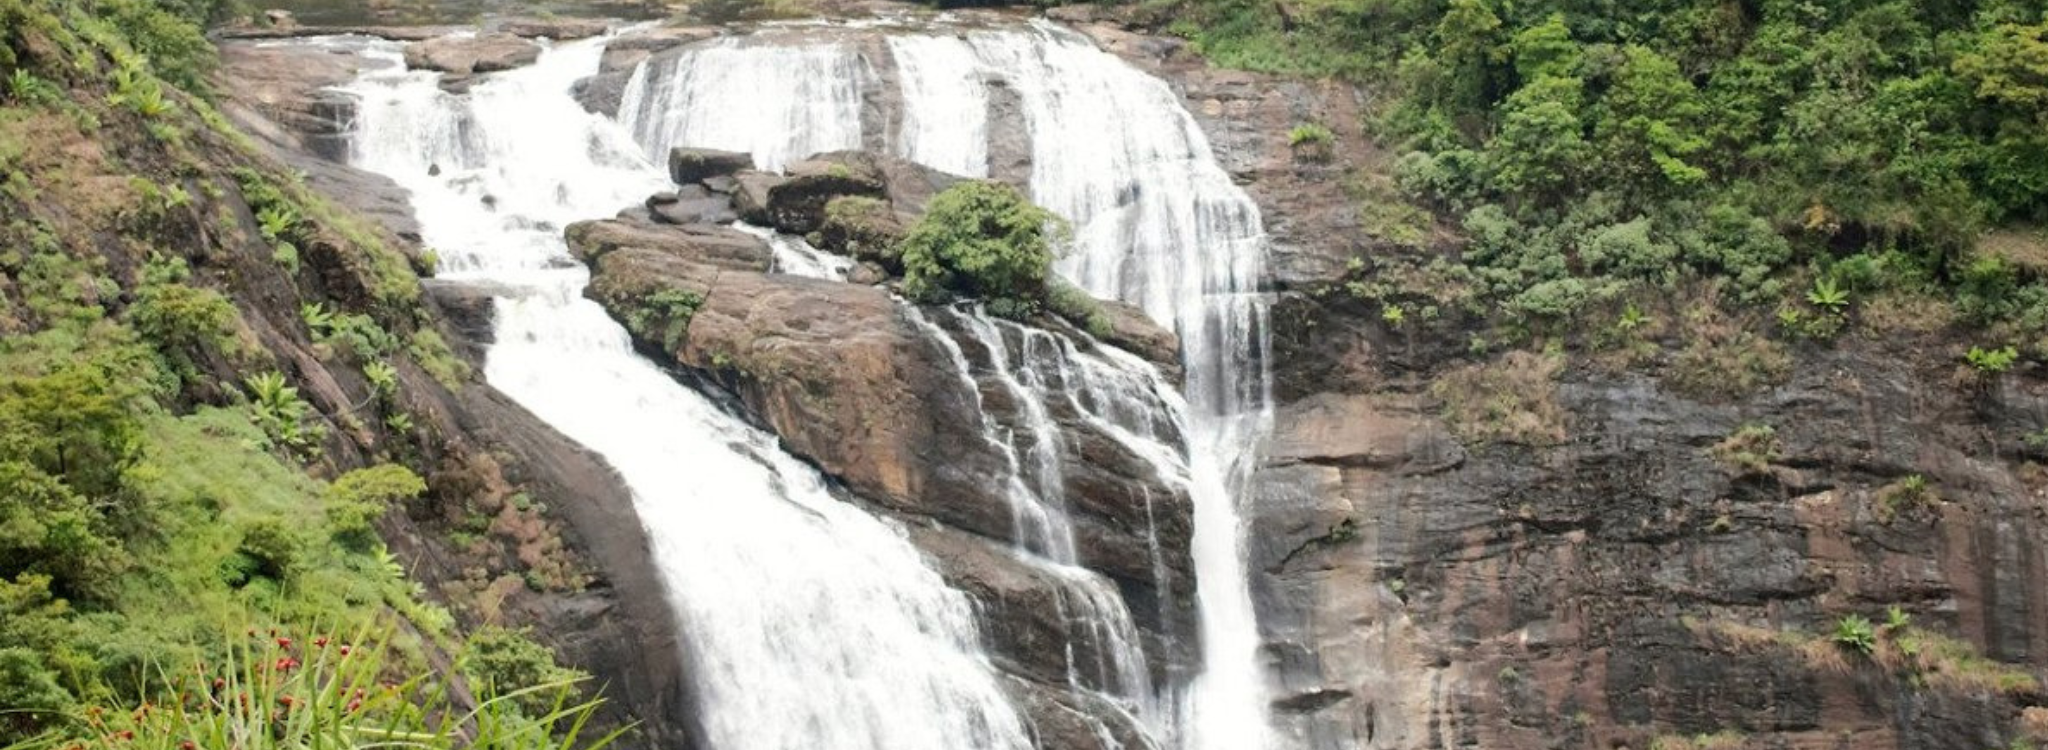 Goa majestic Waterfalls and springs for monsoons